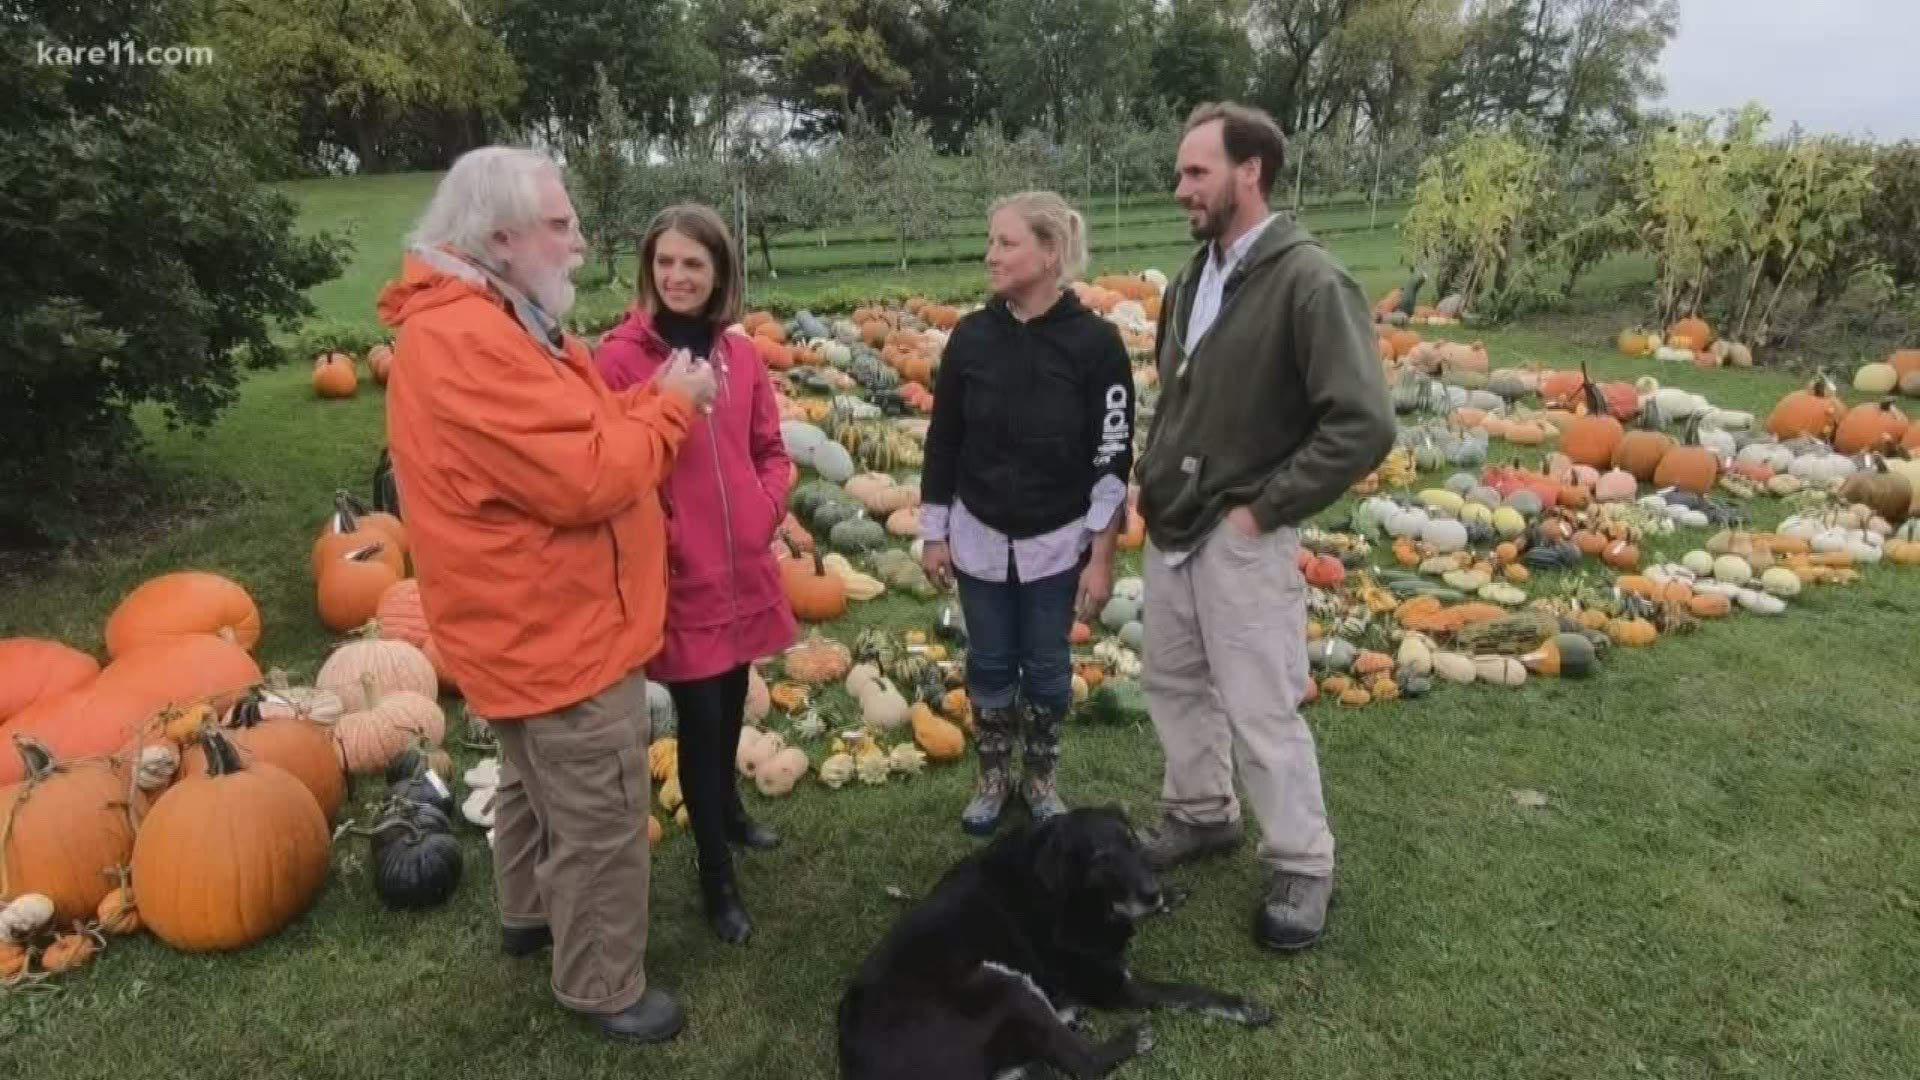 Of the 333 varieties planted at the arboretum, 300 were harvested. But it was a pretty tough year for pumpkins.